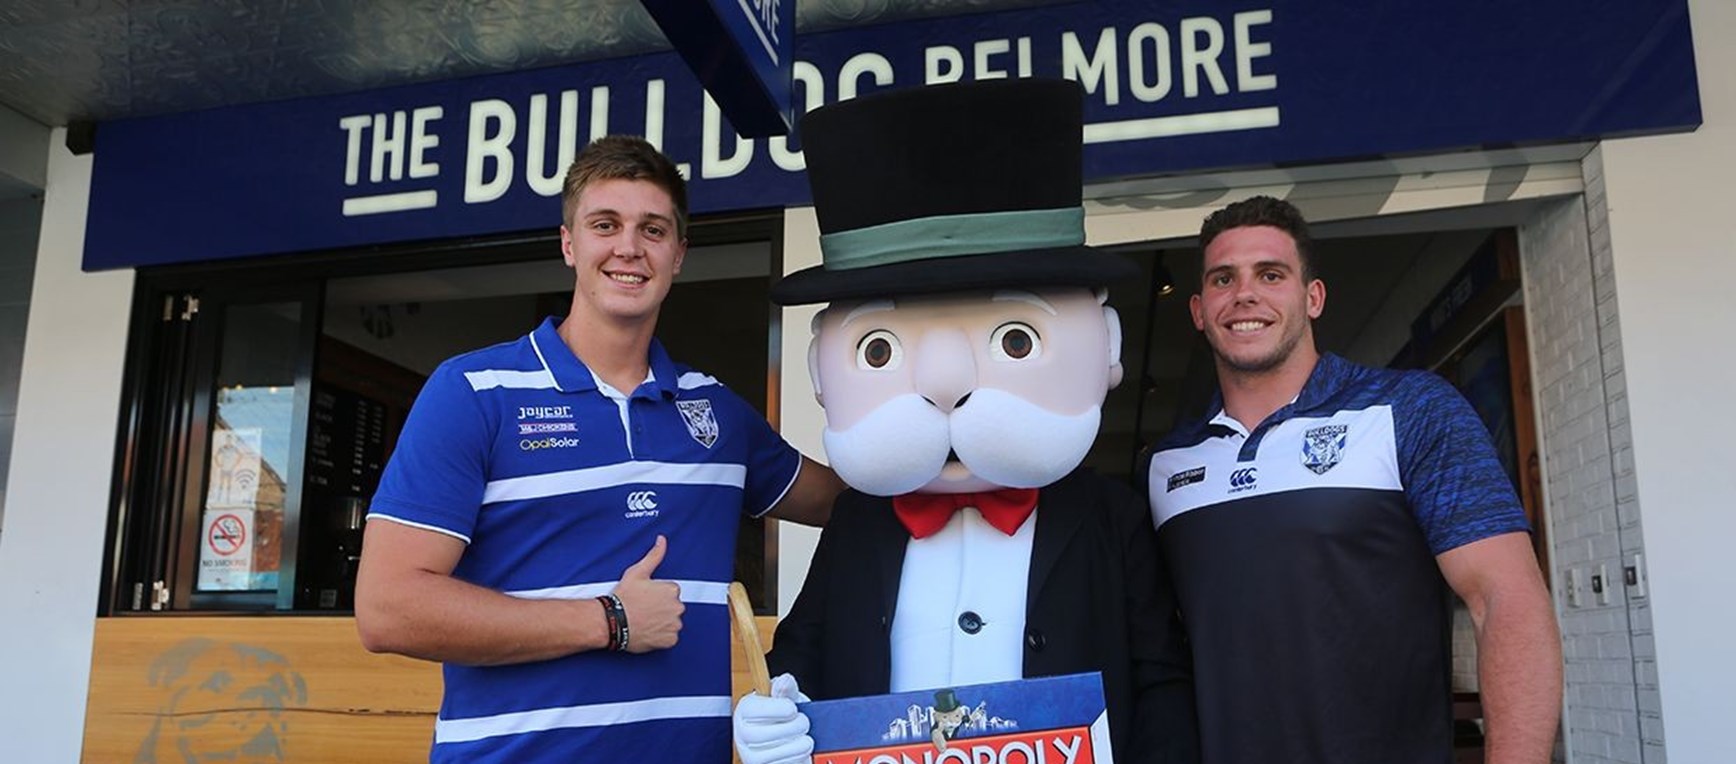 Monopoly Launched at The Bulldog Belmore